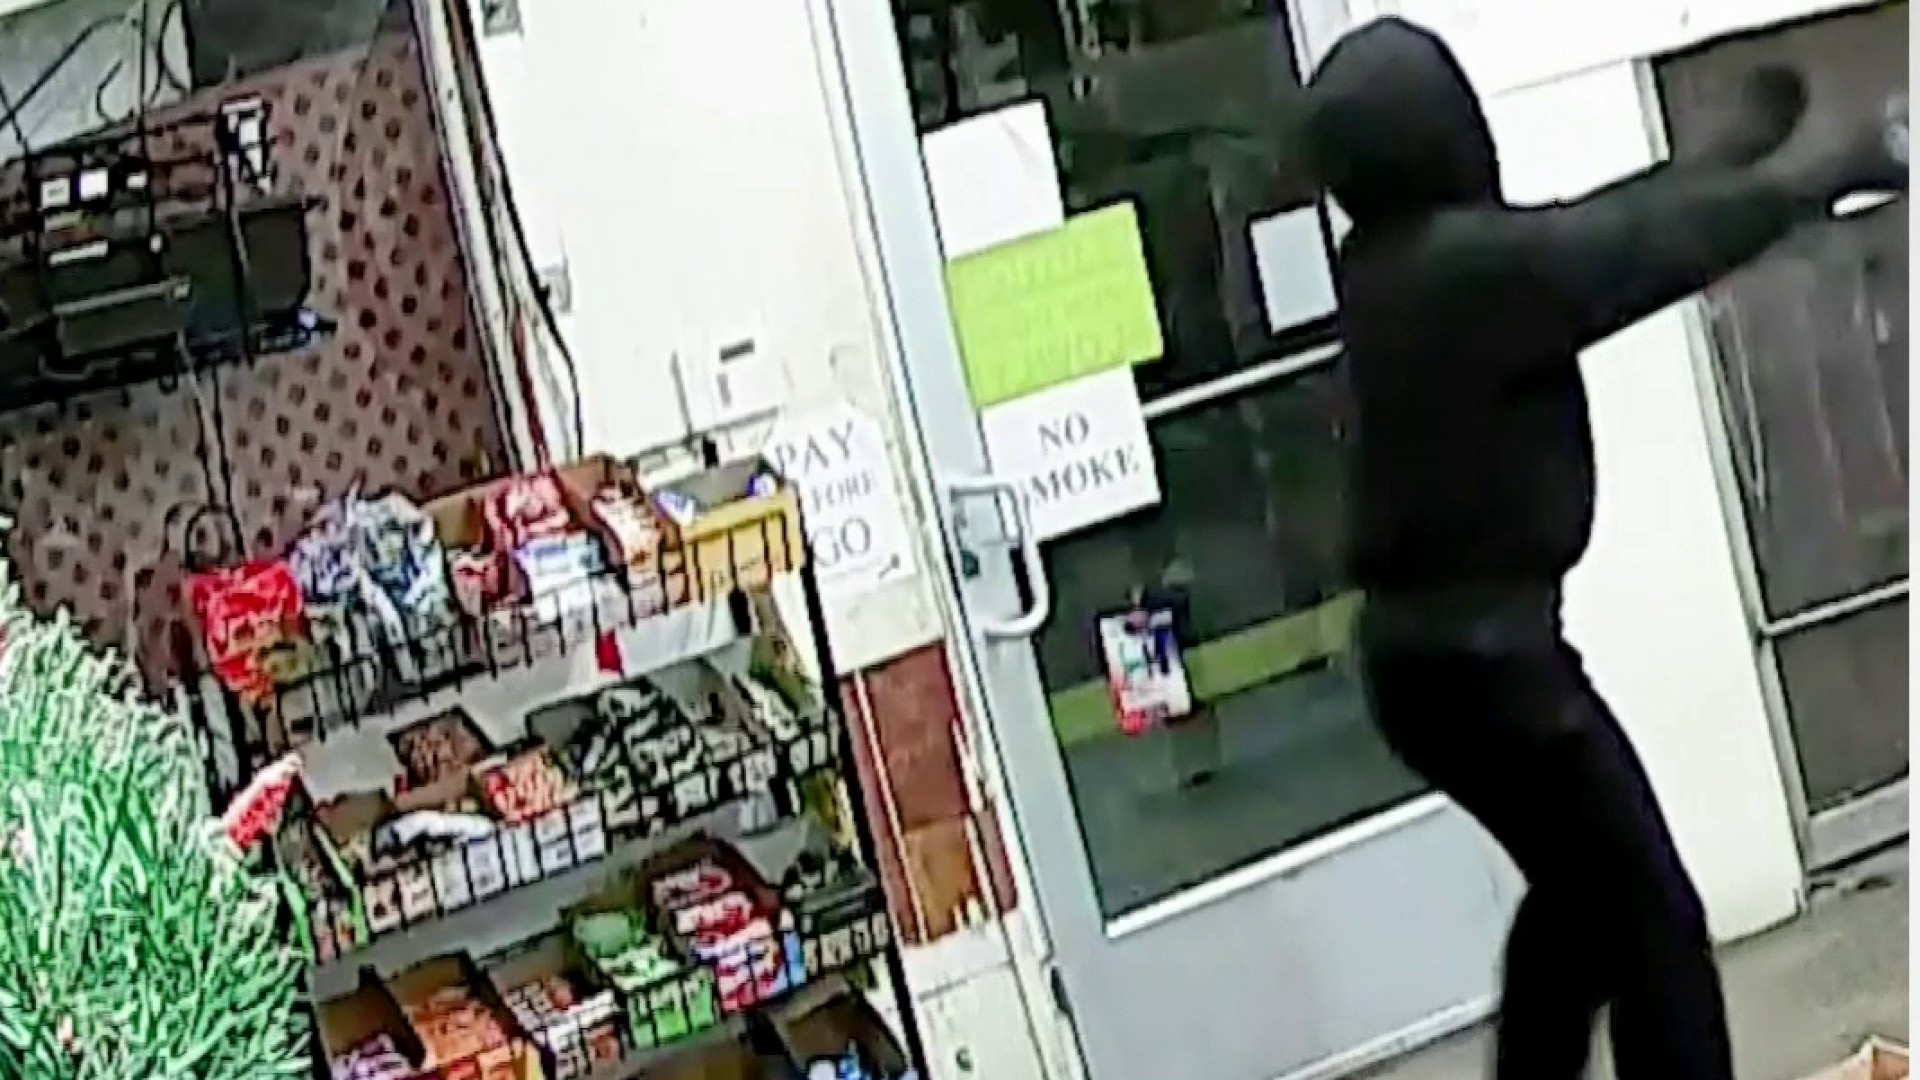 New surveillance video shows gunman inside Mount Dora store moments before deadly shooting